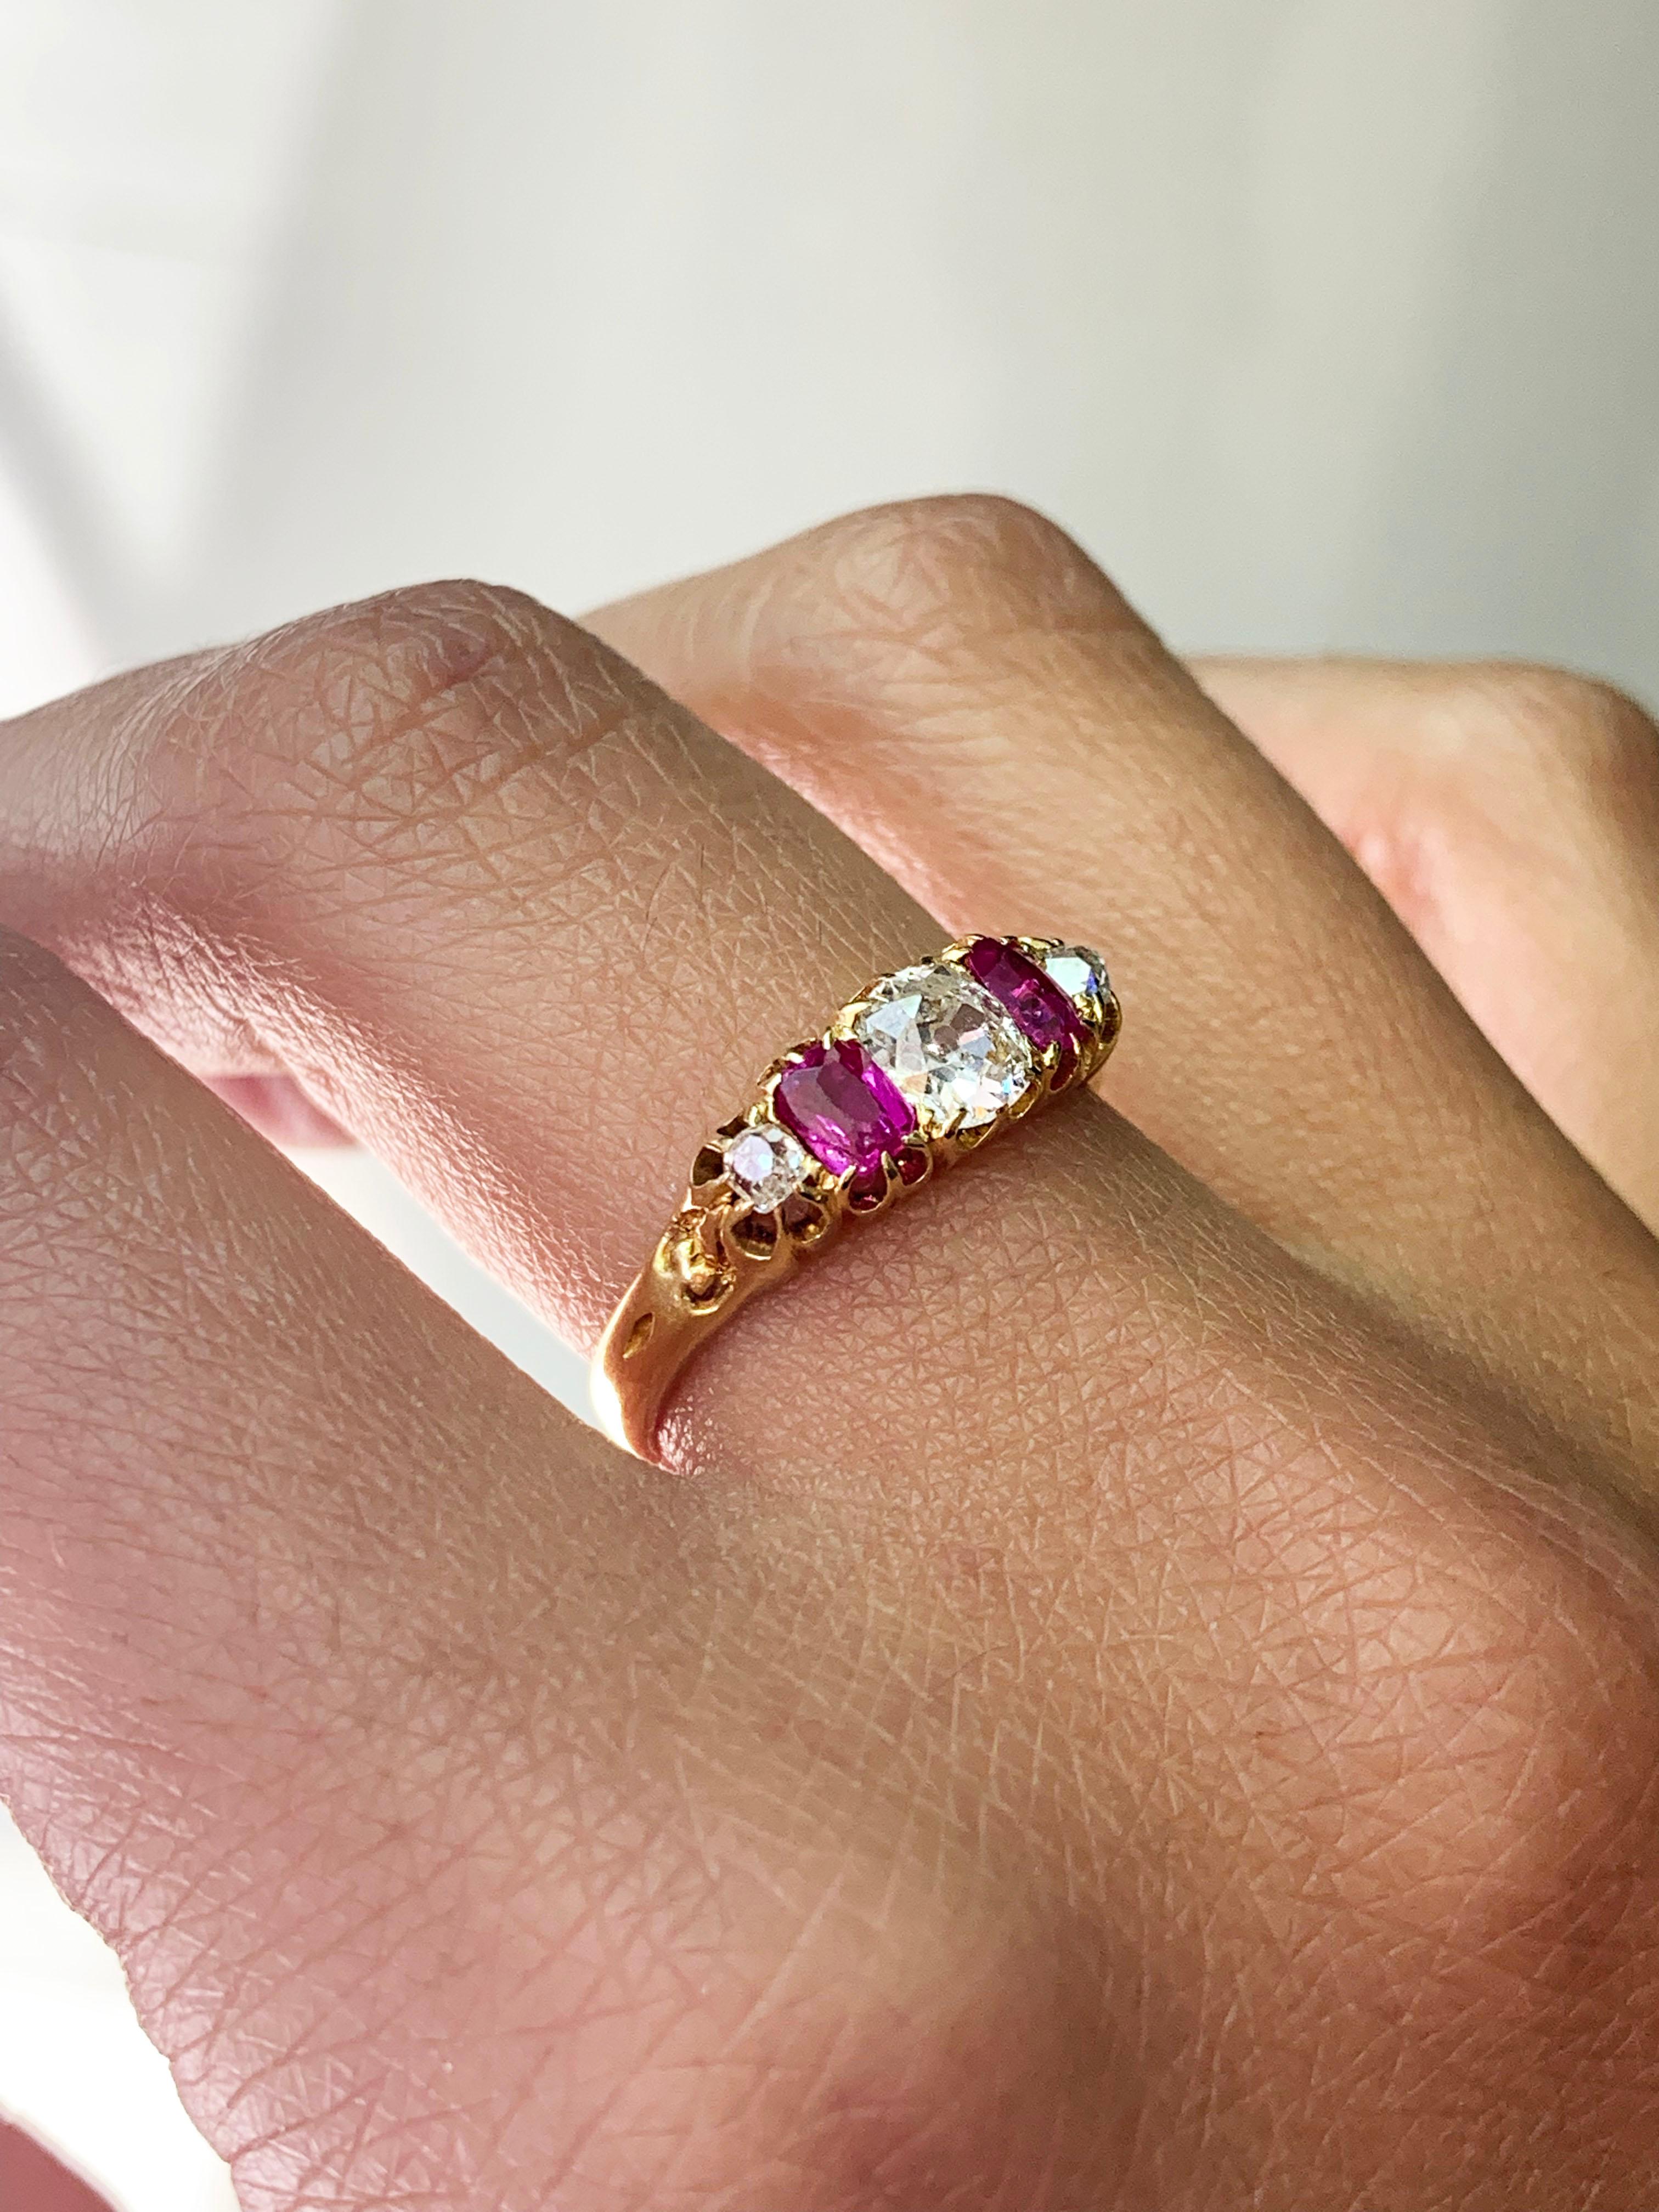 Old Mine Cut Antique 5-Stone Ruby and Old Cut Diamond Ring, circa 1880